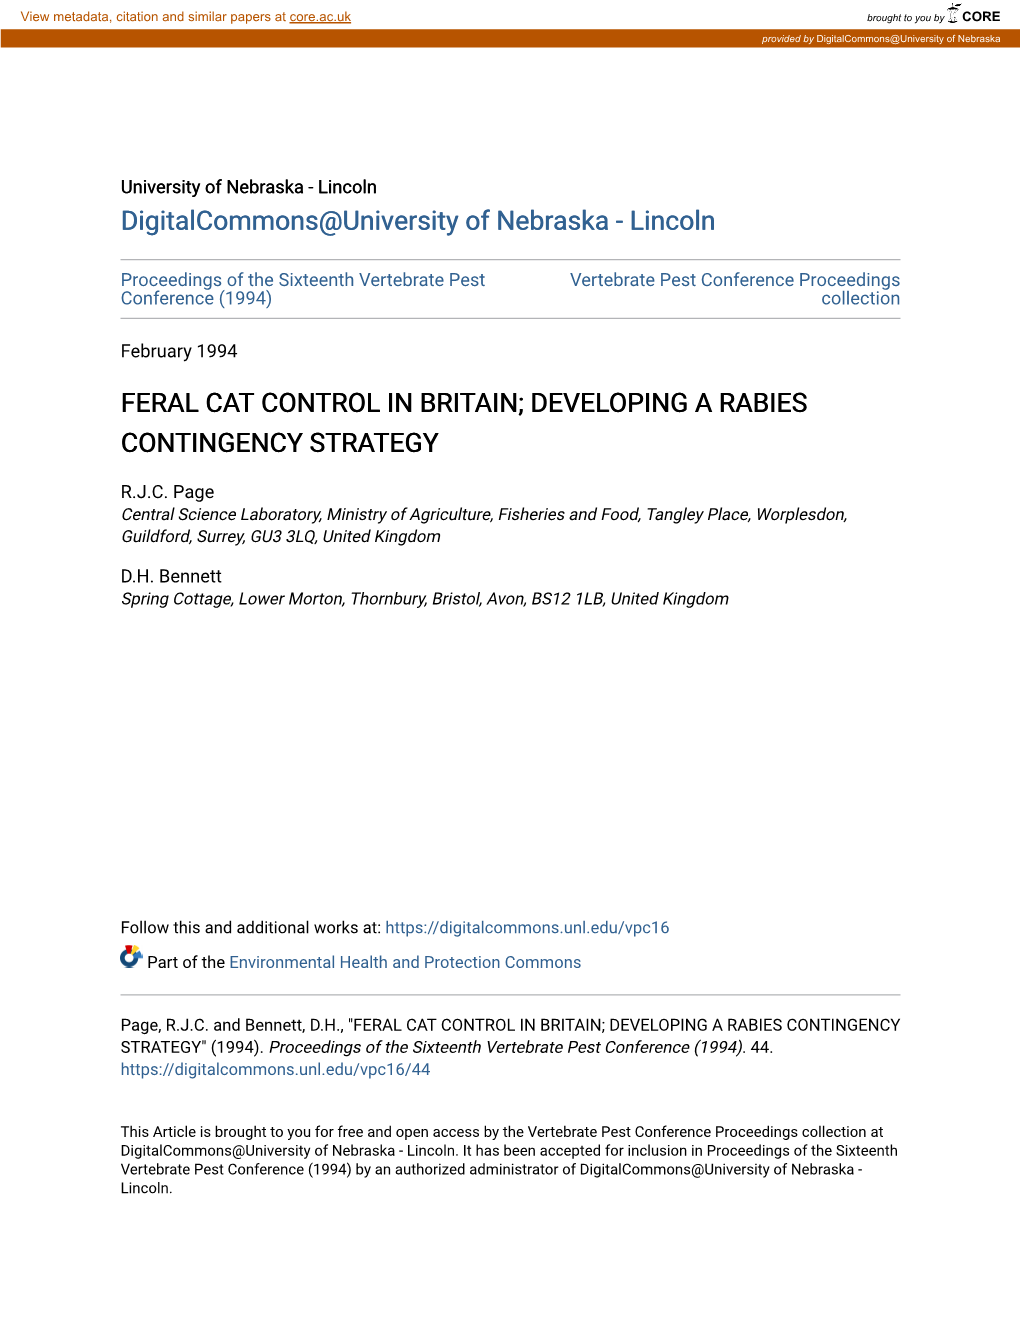 Feral Cat Control in Britain; Developing a Rabies Contingency Strategy